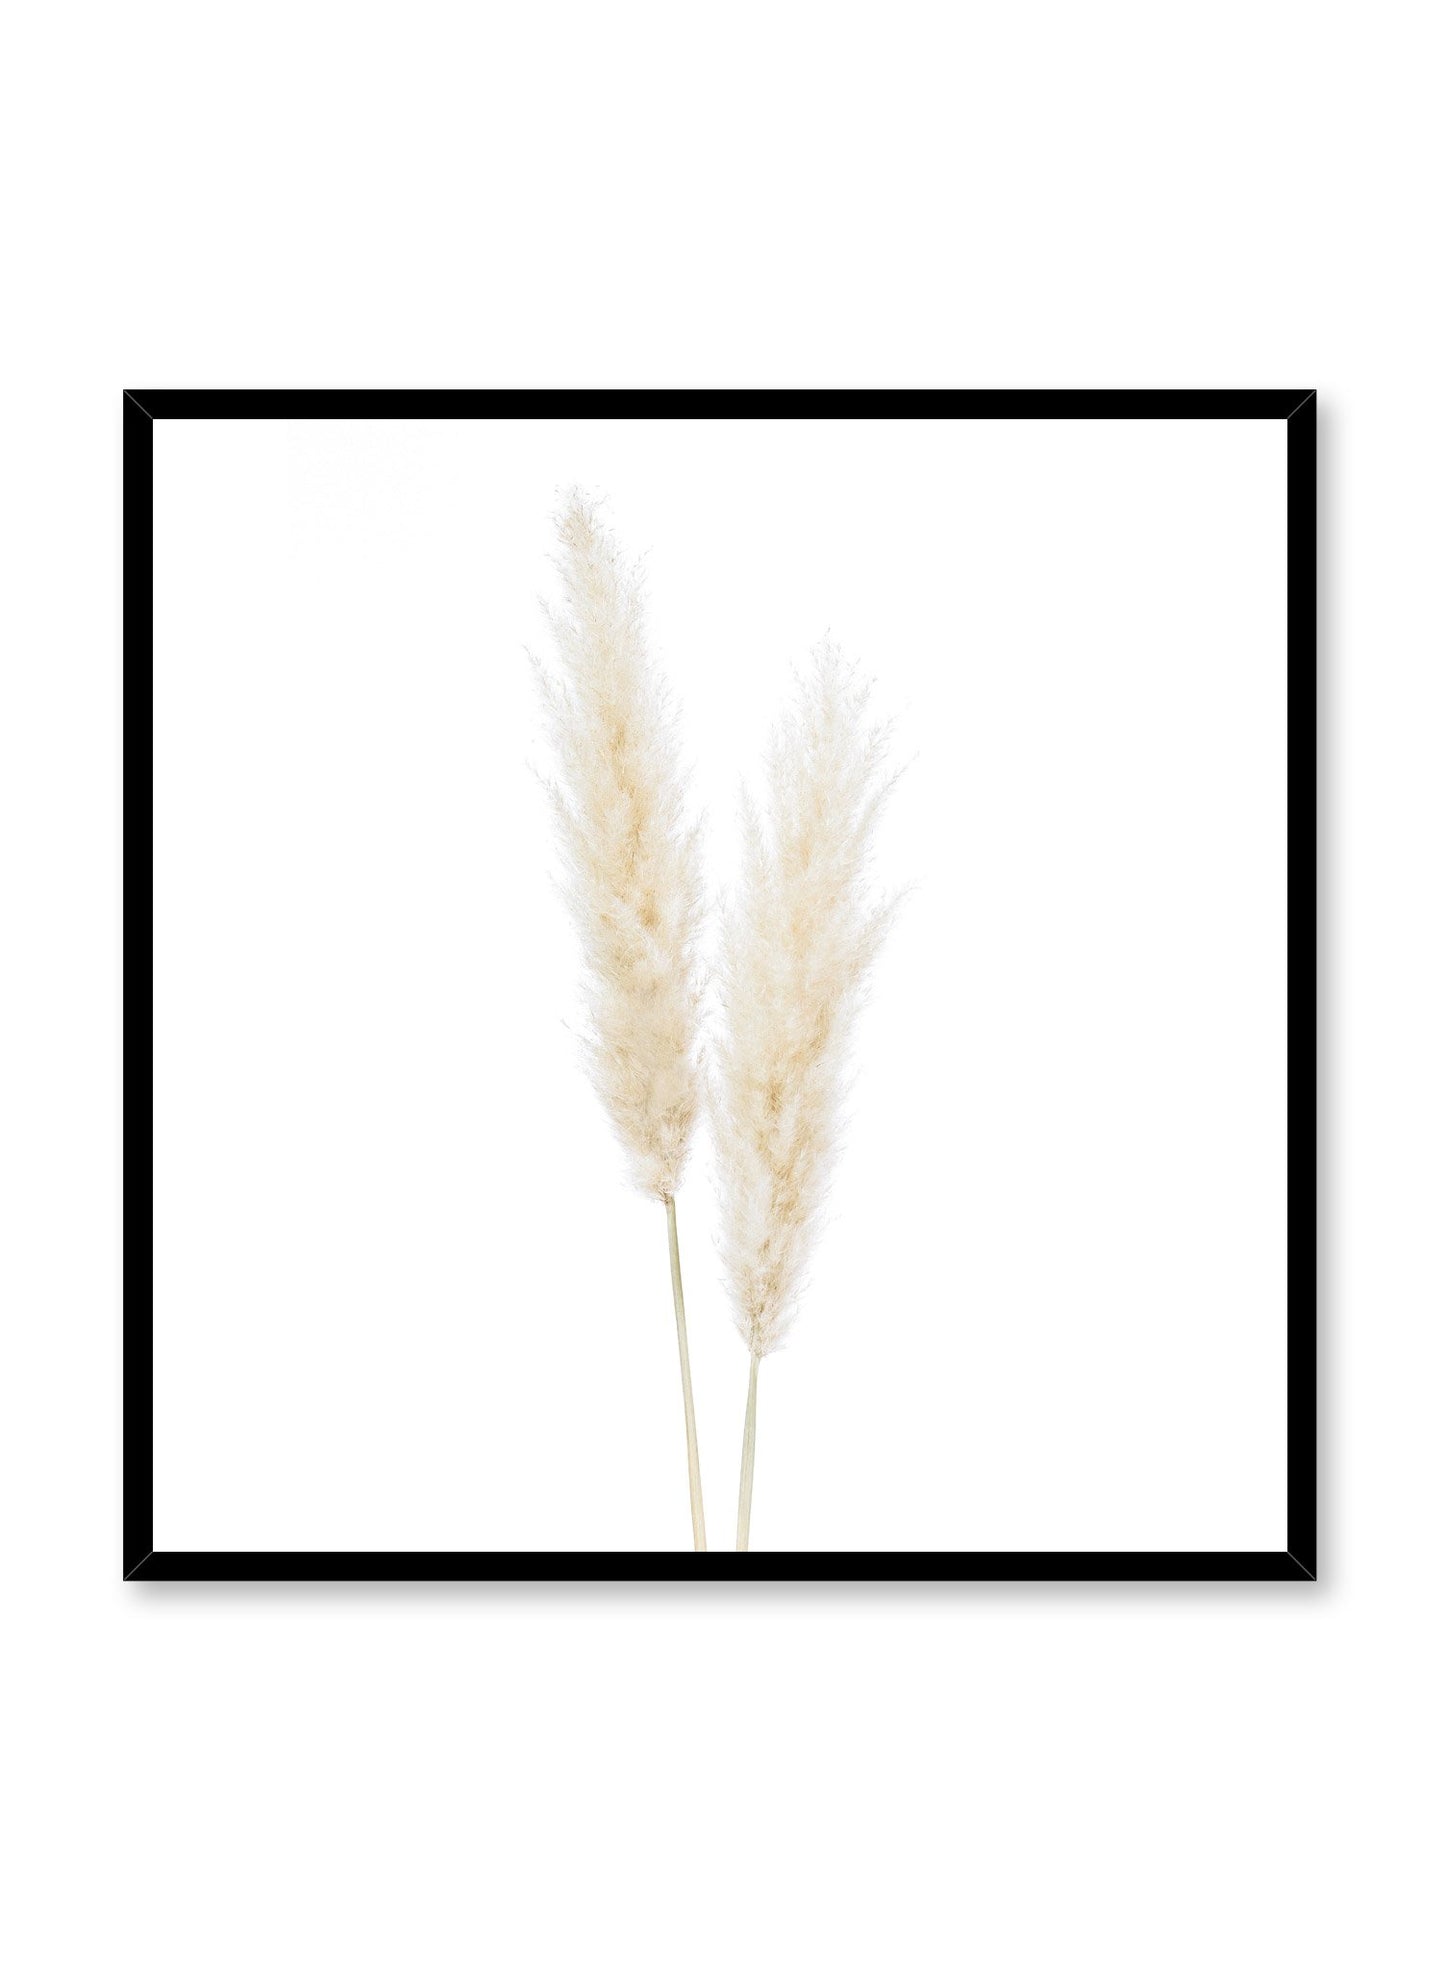 Minimalistic wall poster by Opposite Wall with grasses botanical photography in square format